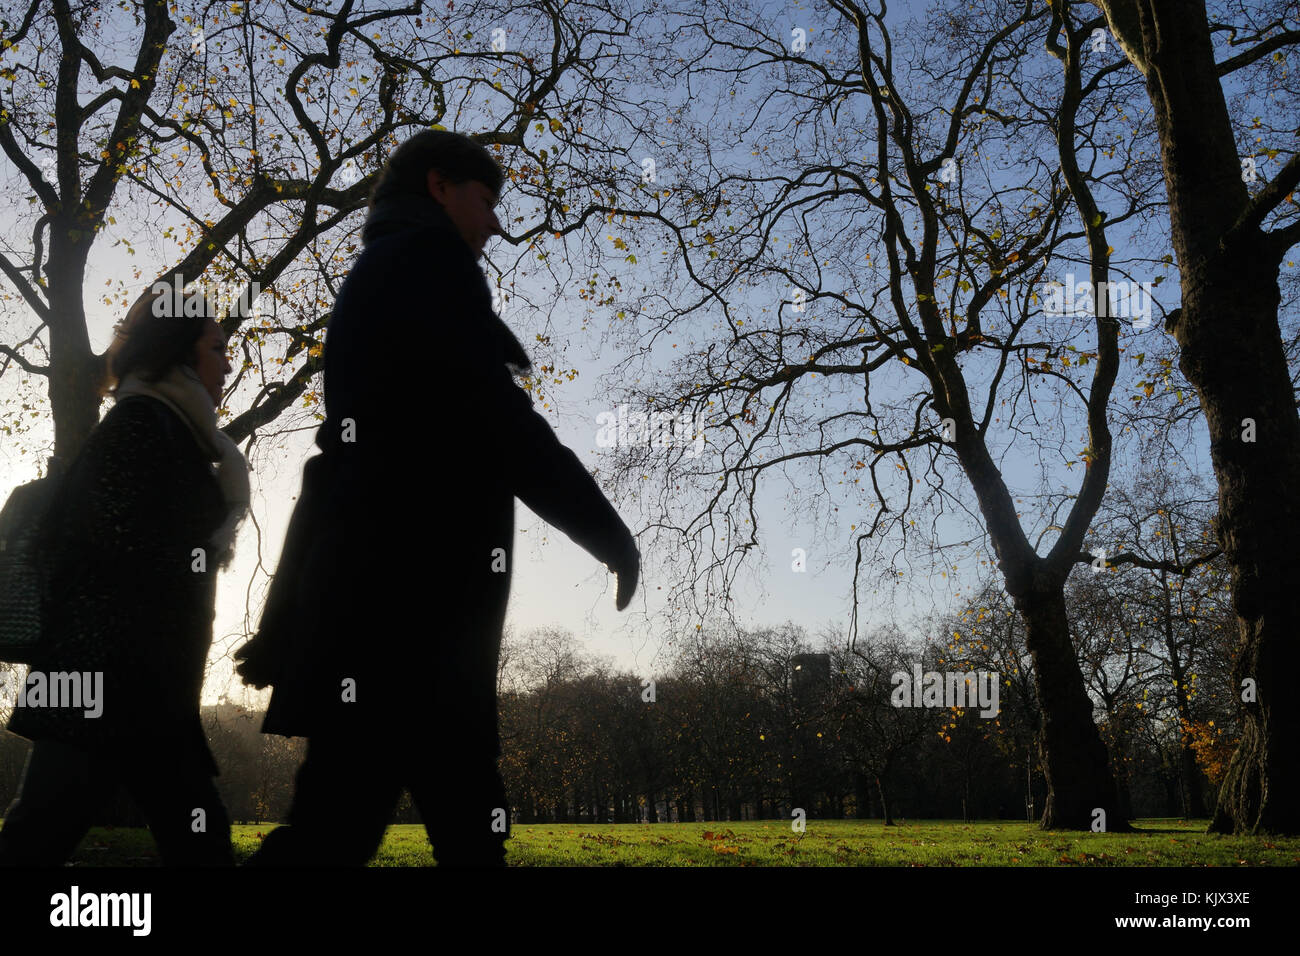 Walkers enjoy the late Autumn weather in Green Park, London, UK Stock Photo